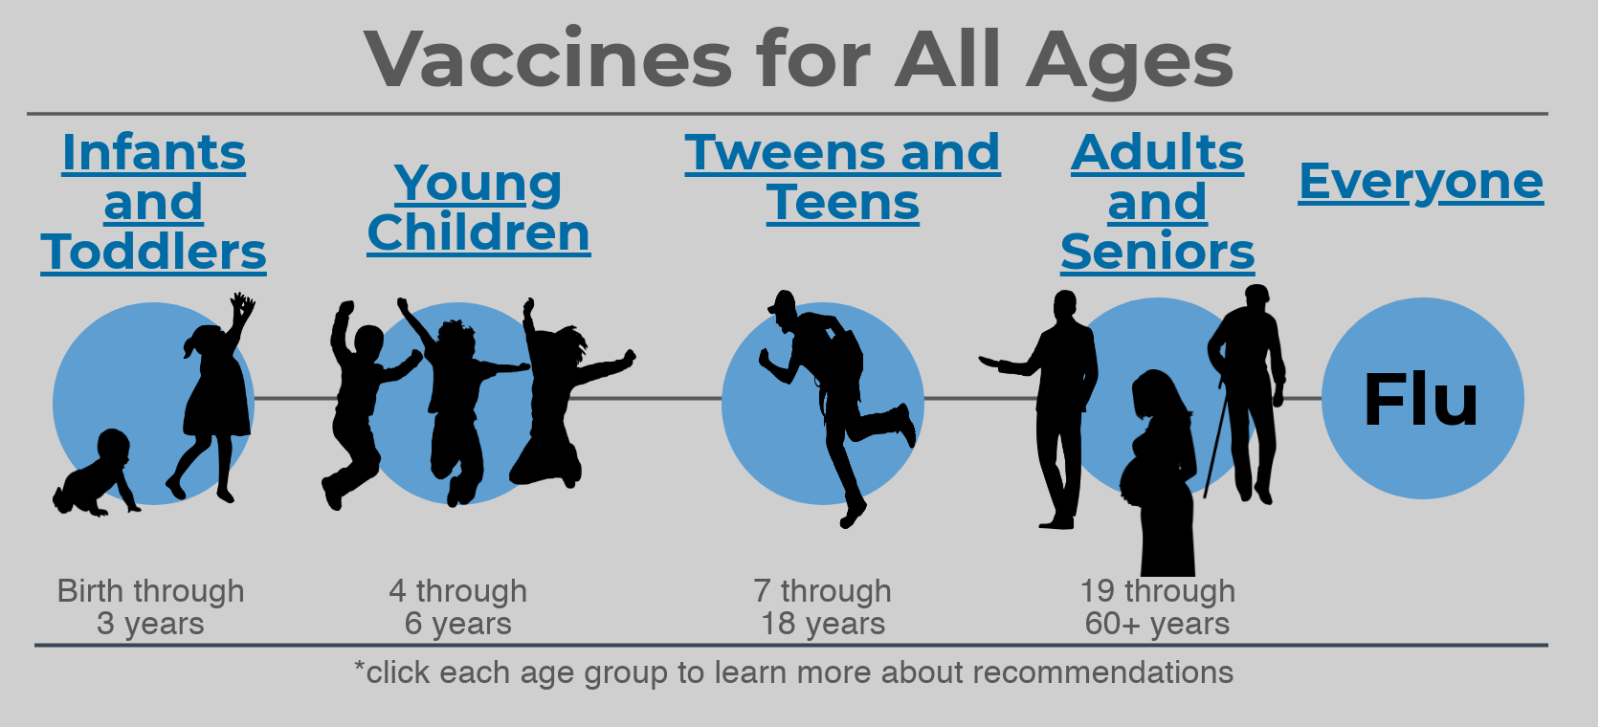 Vaccines for all Ages - please see text links below for accessibility